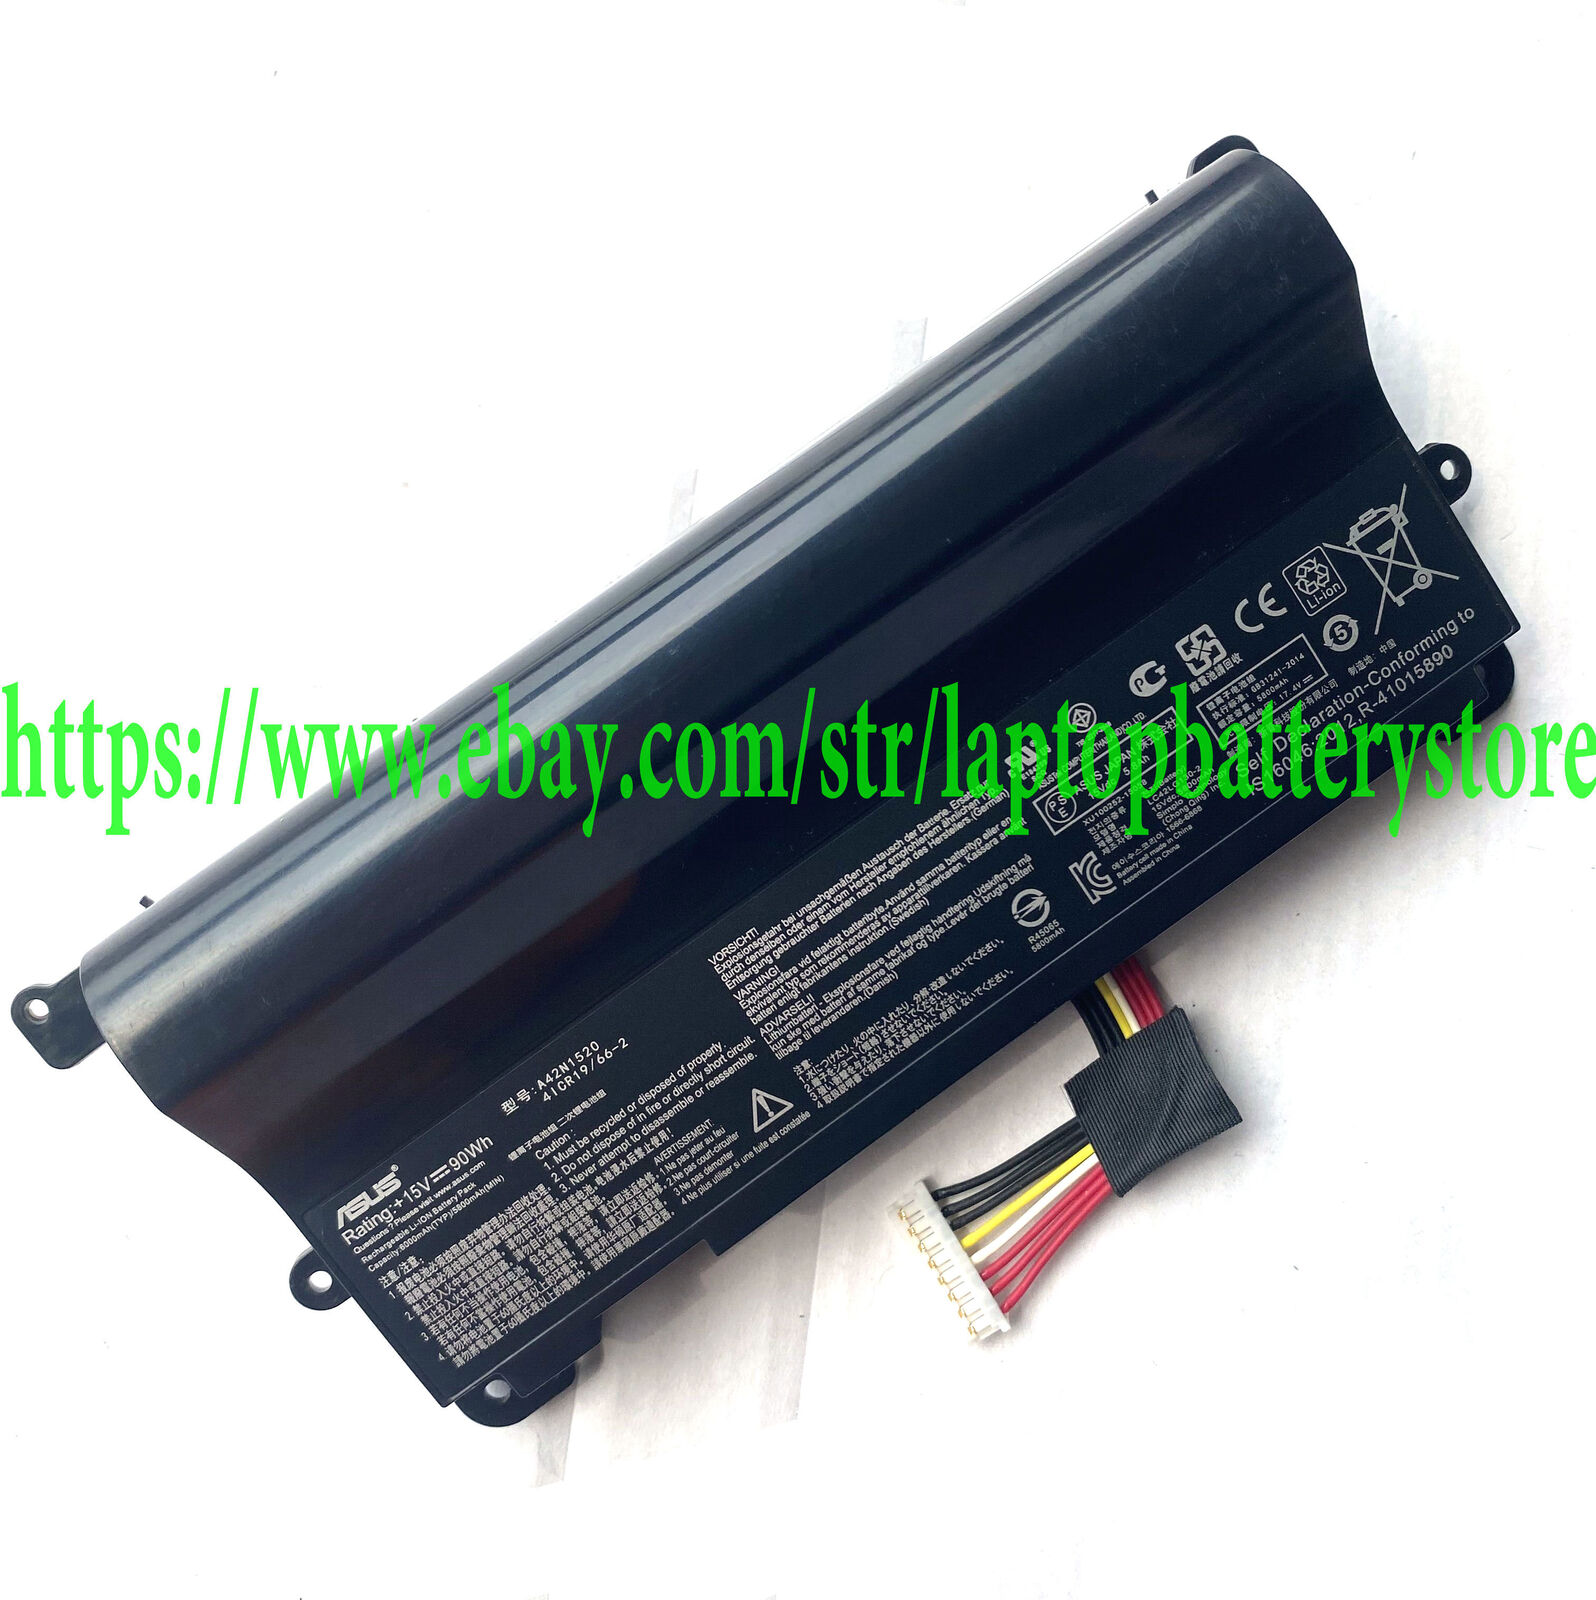 Genuine A42N1520 Battery for Asus ROG G752VY GFX72 GFX72VY6700 GFX72VY6820 GFX72